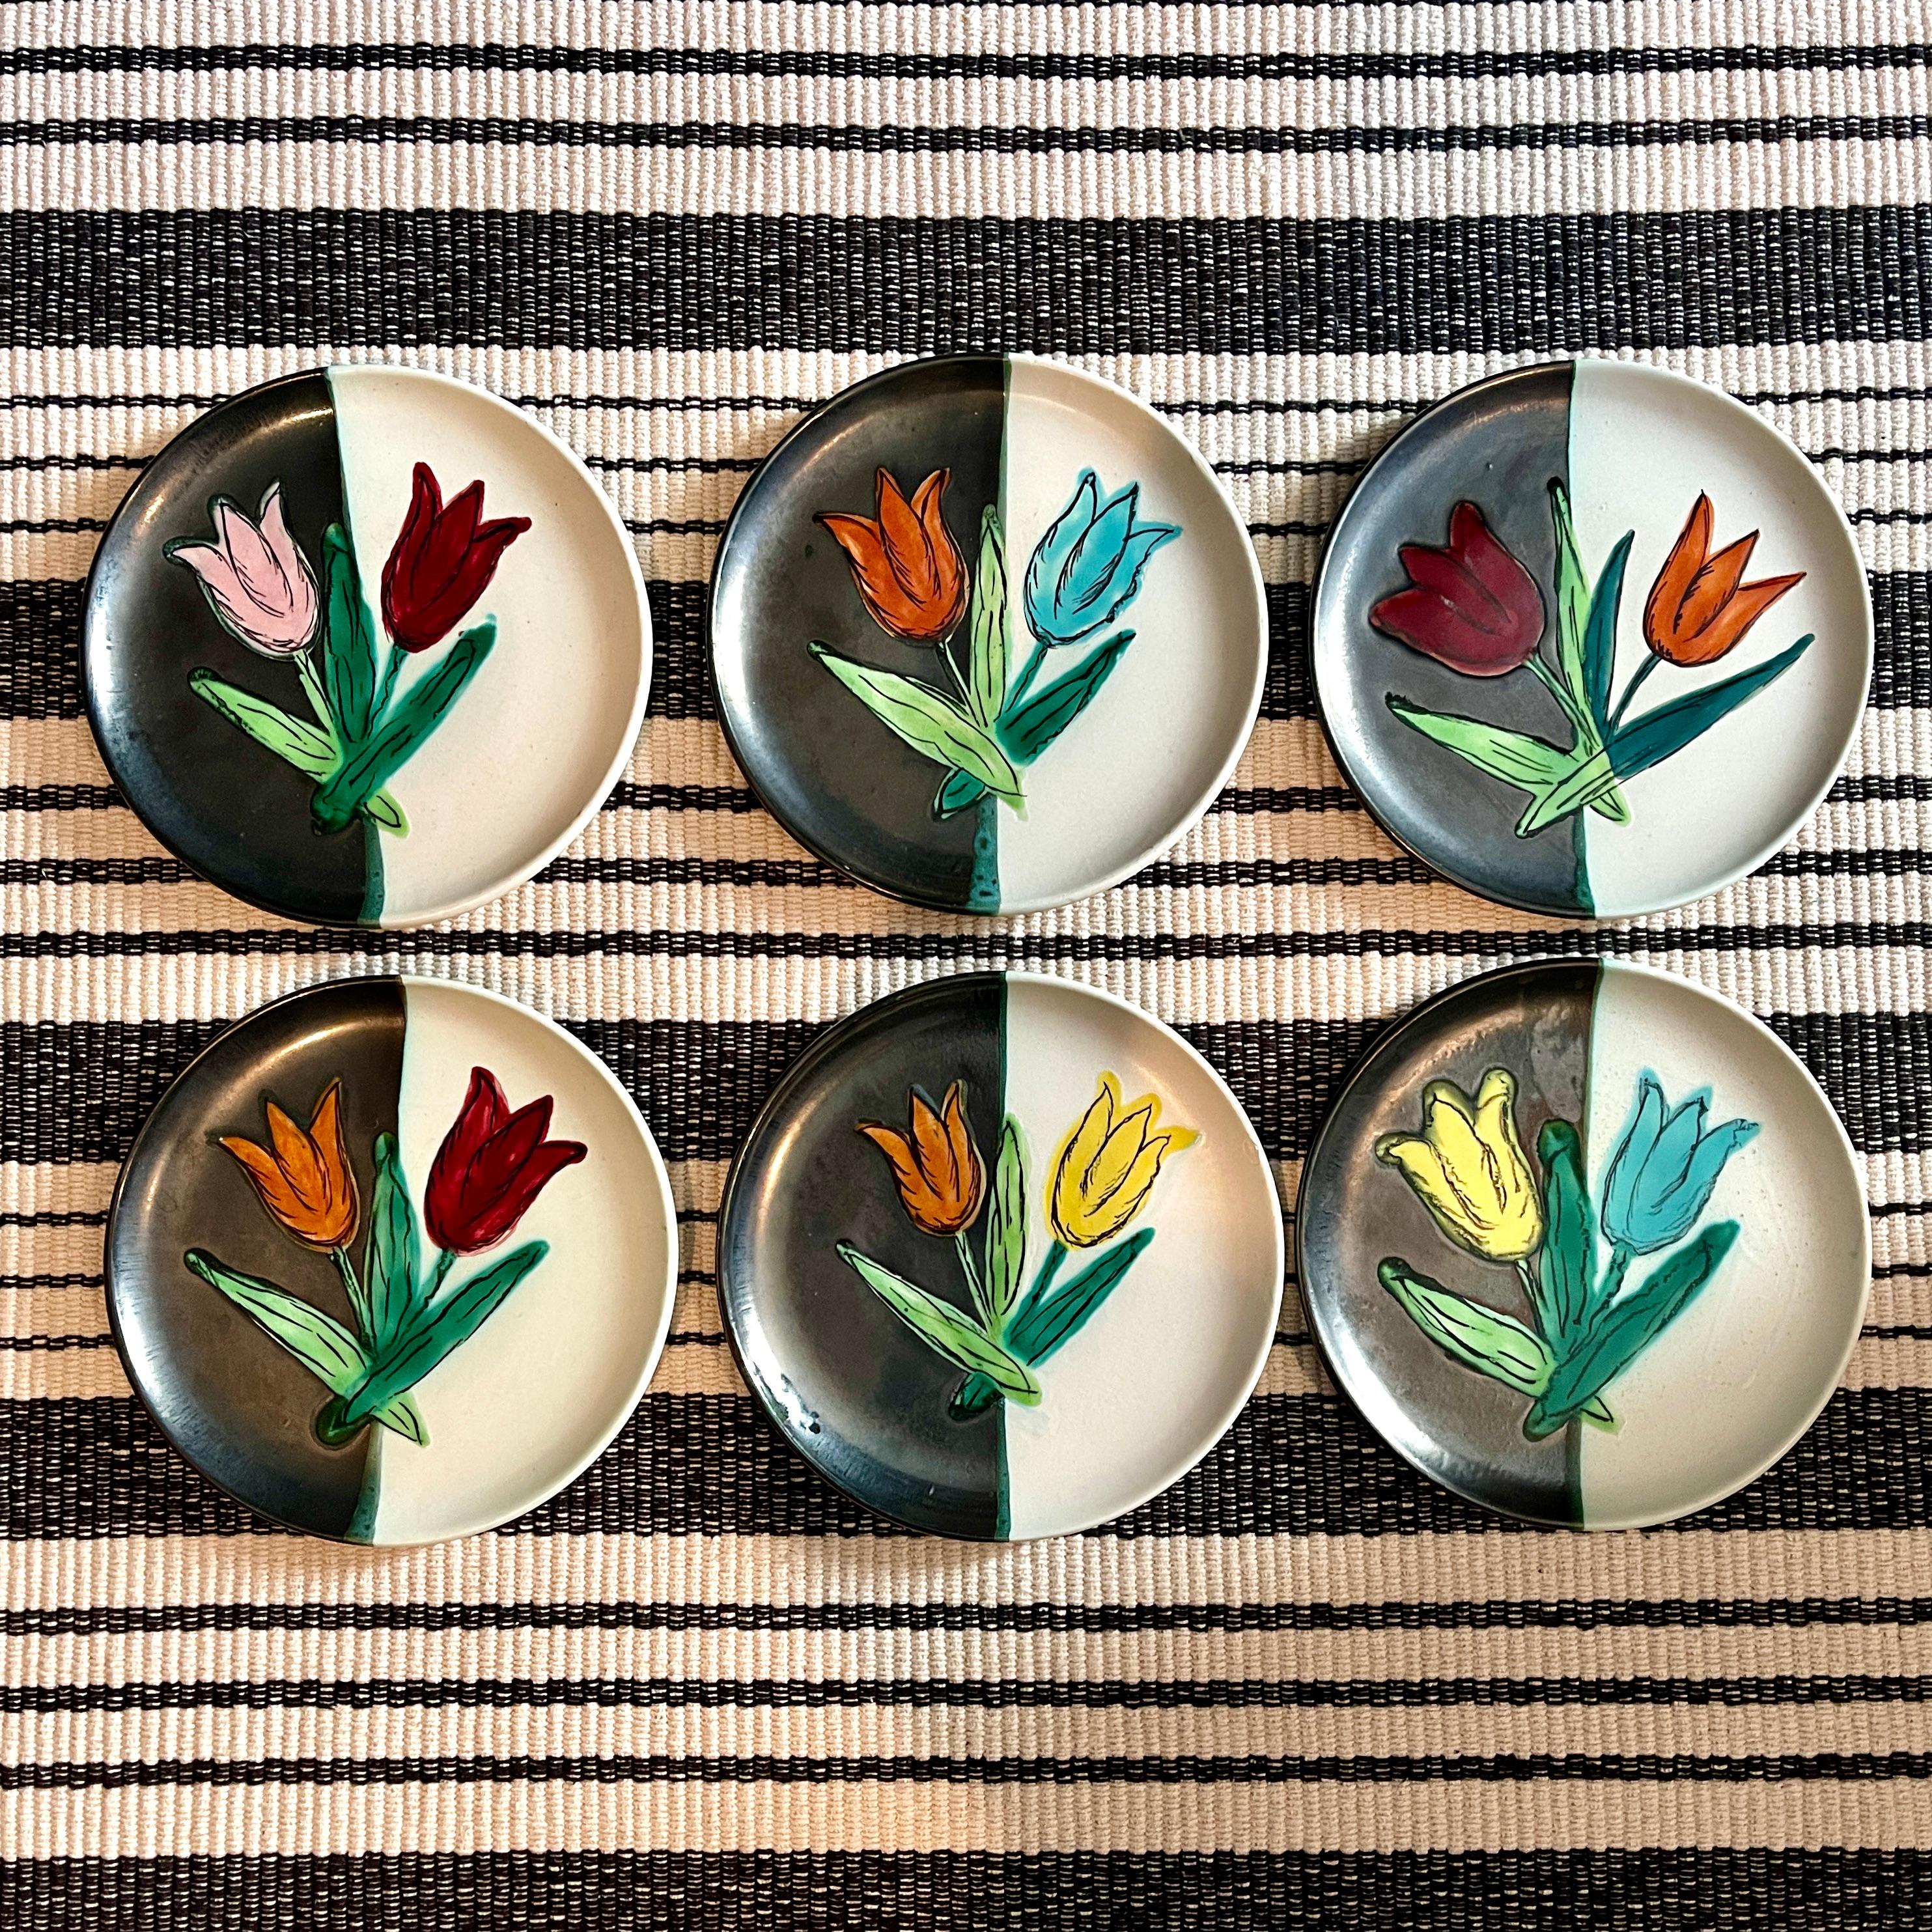 From the Atelier Cérenne à Vallauris in France, a set of six pottery Tulip plates, circa 1940-1950.

Each plate is finished in a matte glazing of half black and half white, with a pair of raised, glossy glazed tulips painted in complimentary color